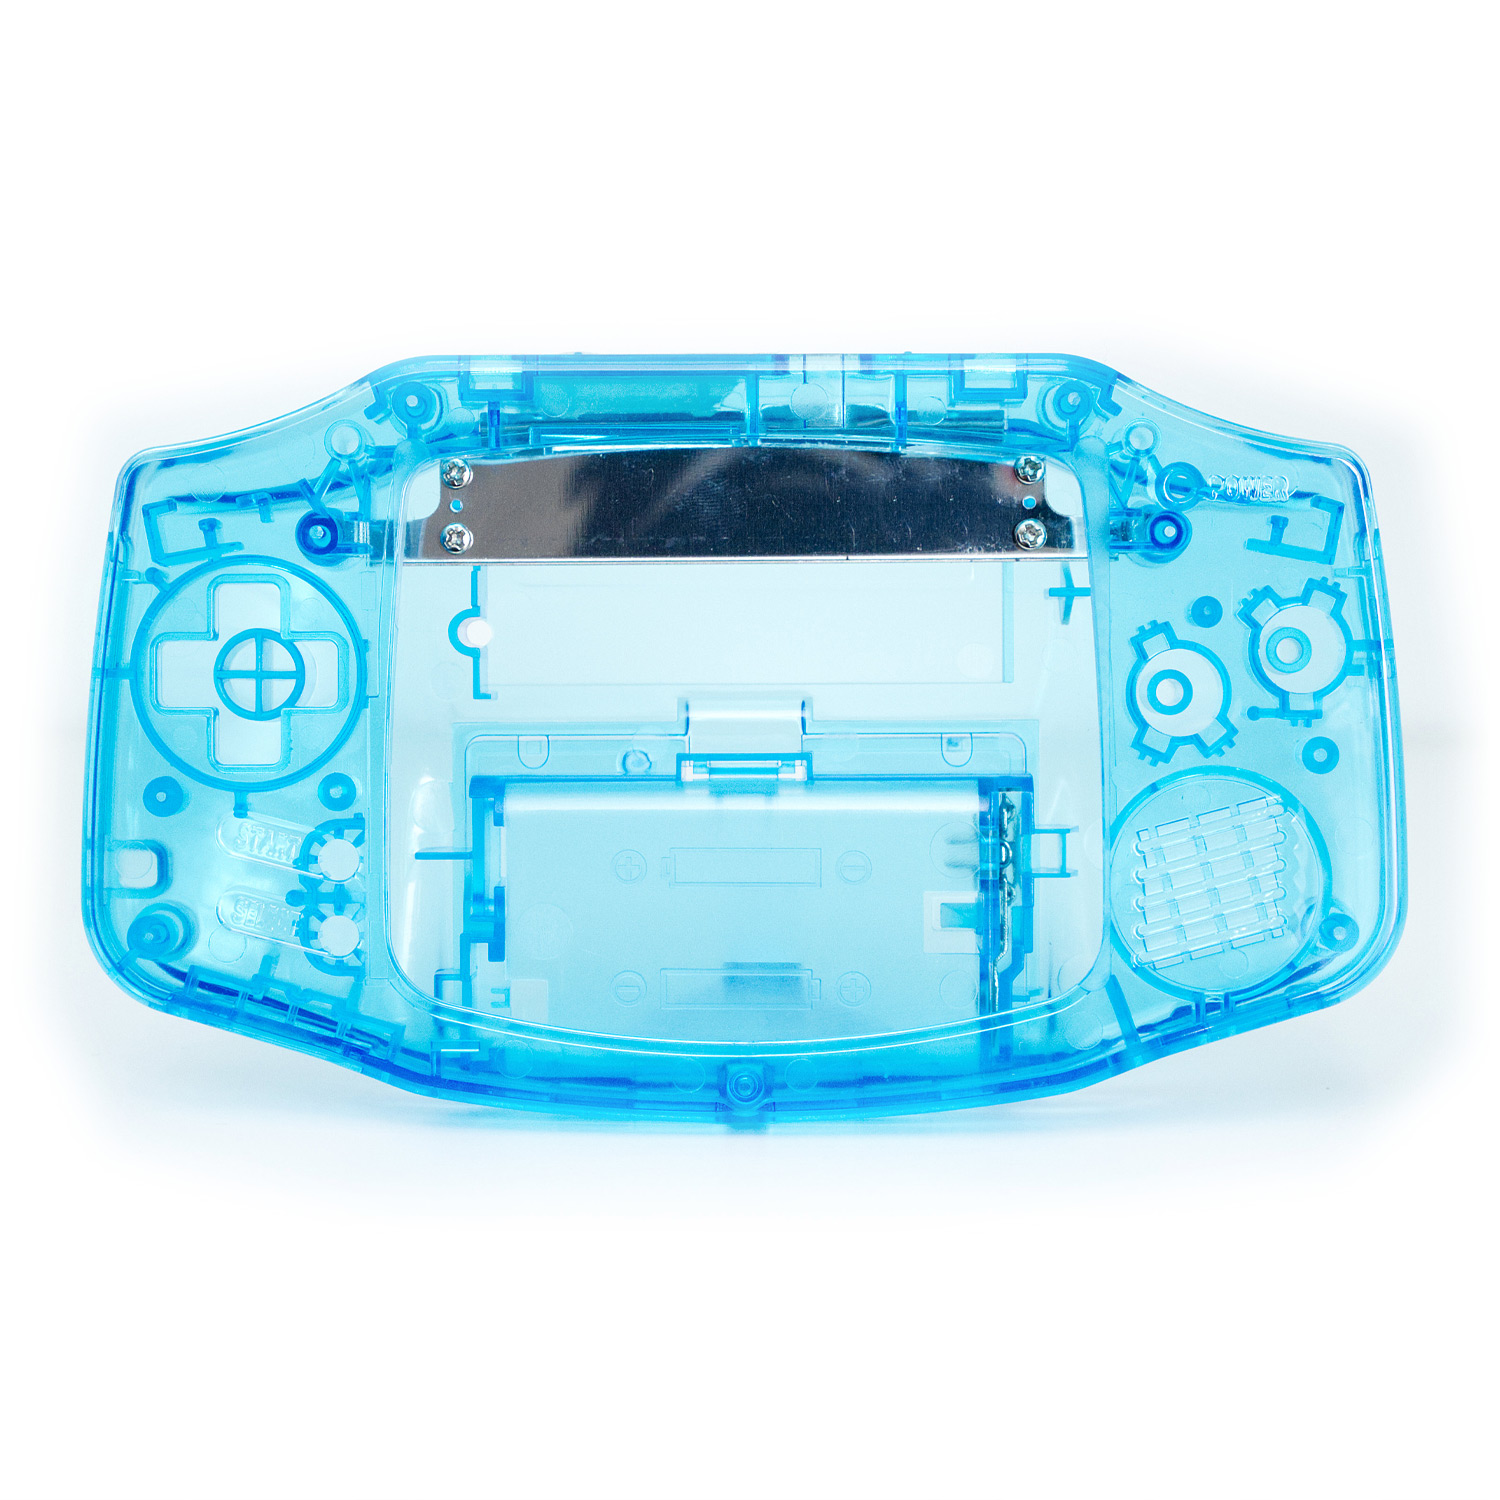 Game Boy Advance Shell for CleanScreen Laminated Kit (Crystal Blue)